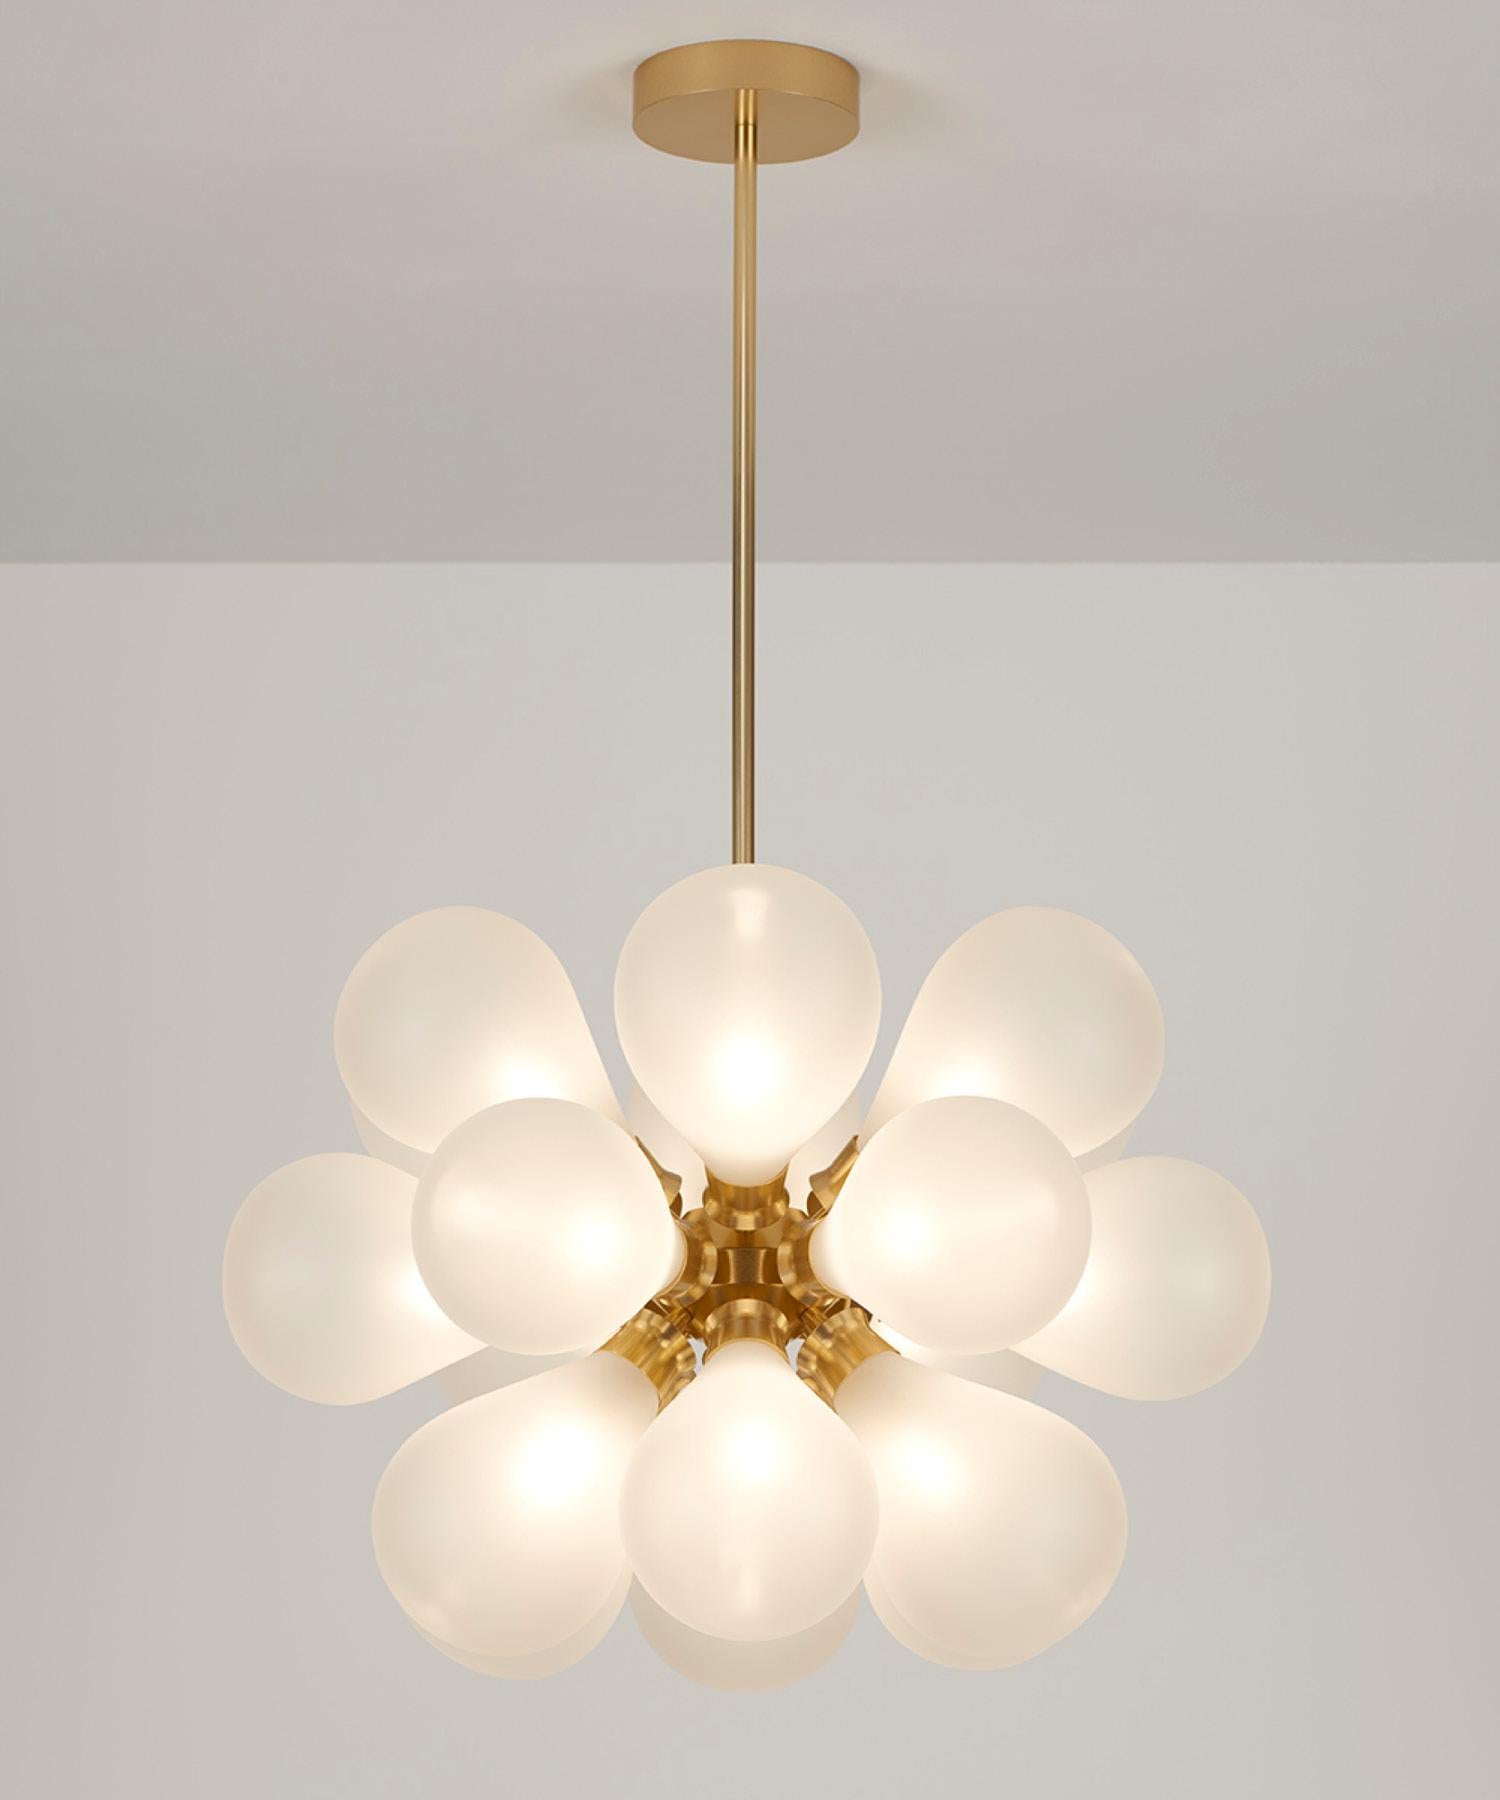 Anodized Cintola Maxi Pendant in Polished Aluminium with 18 Handblown Frosted Globes For Sale